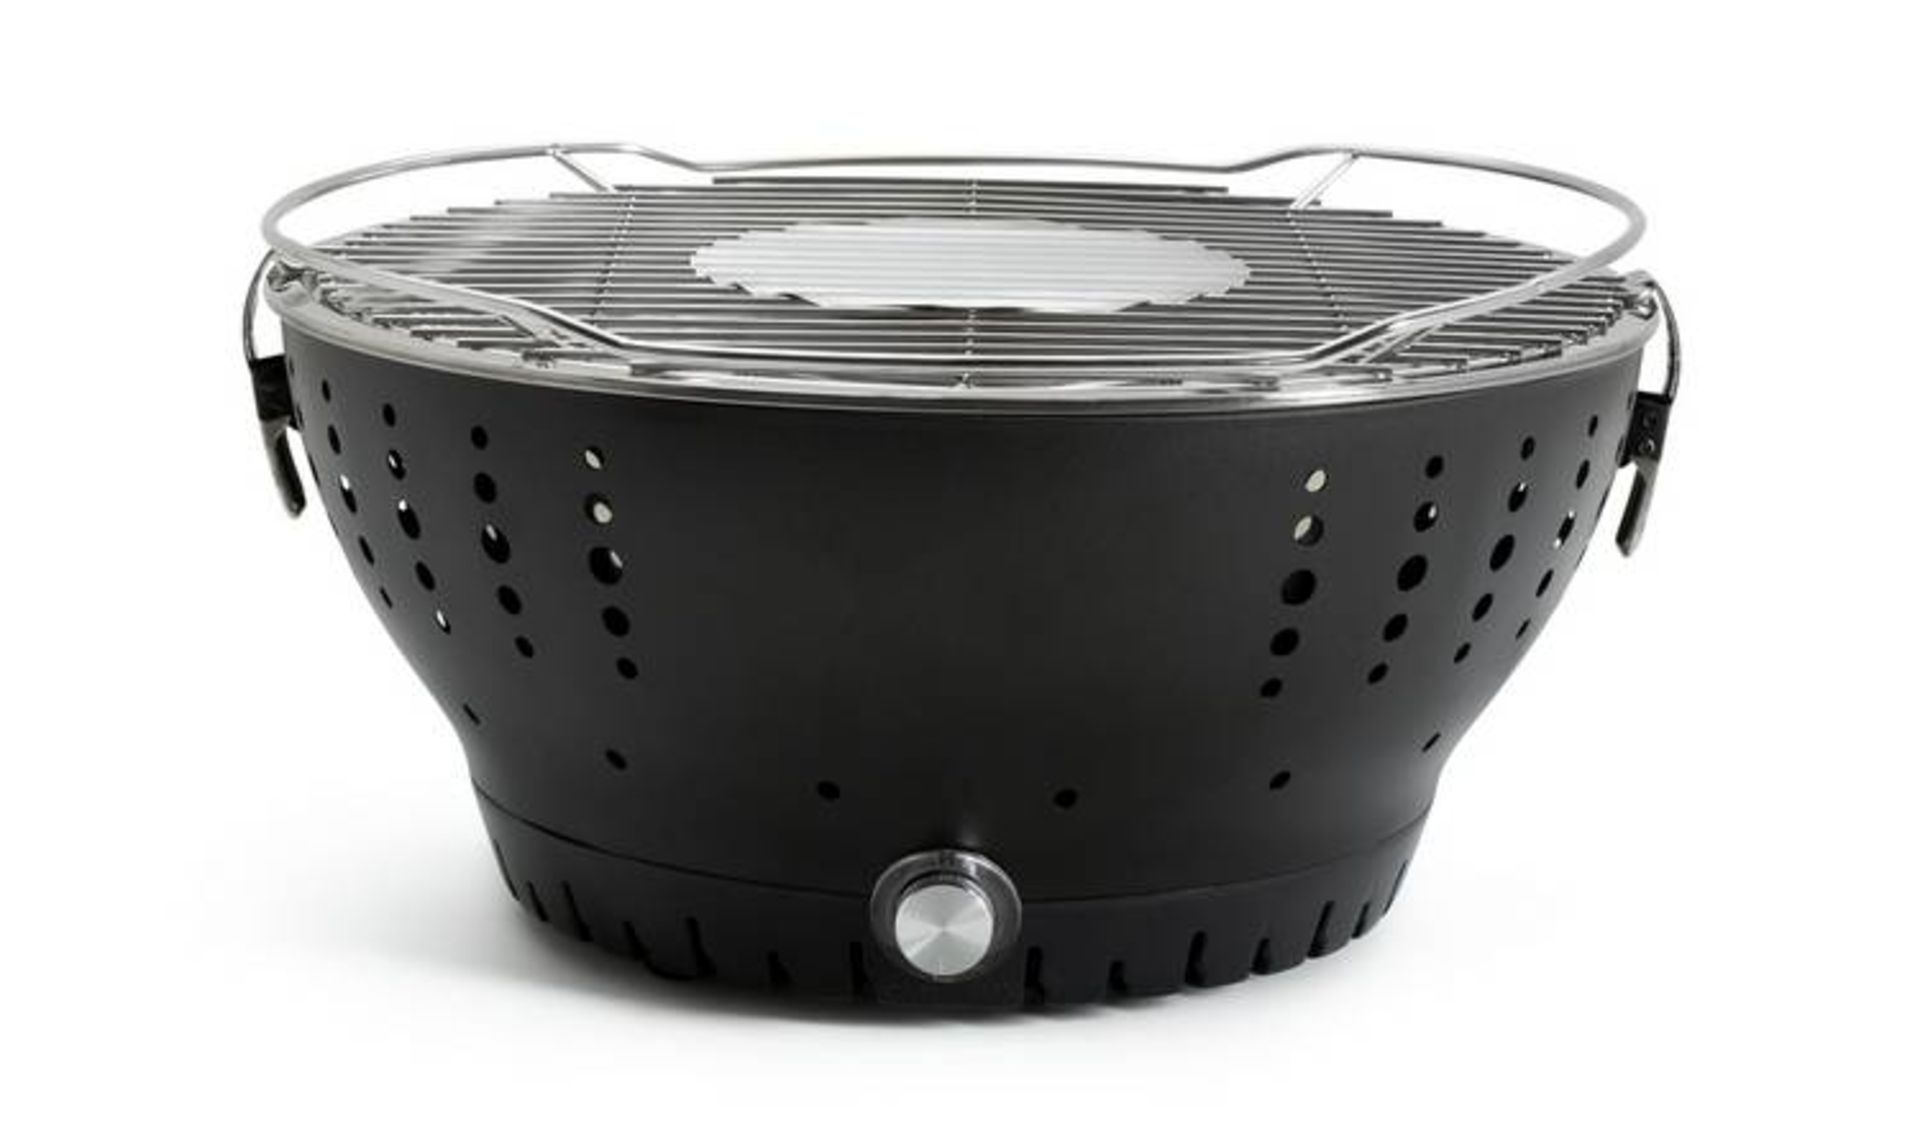 20 X BRAND NEW 38CM PREMIUM CHARCOAL BBQ WITH BUILT IN FANS RRP £89 EACH